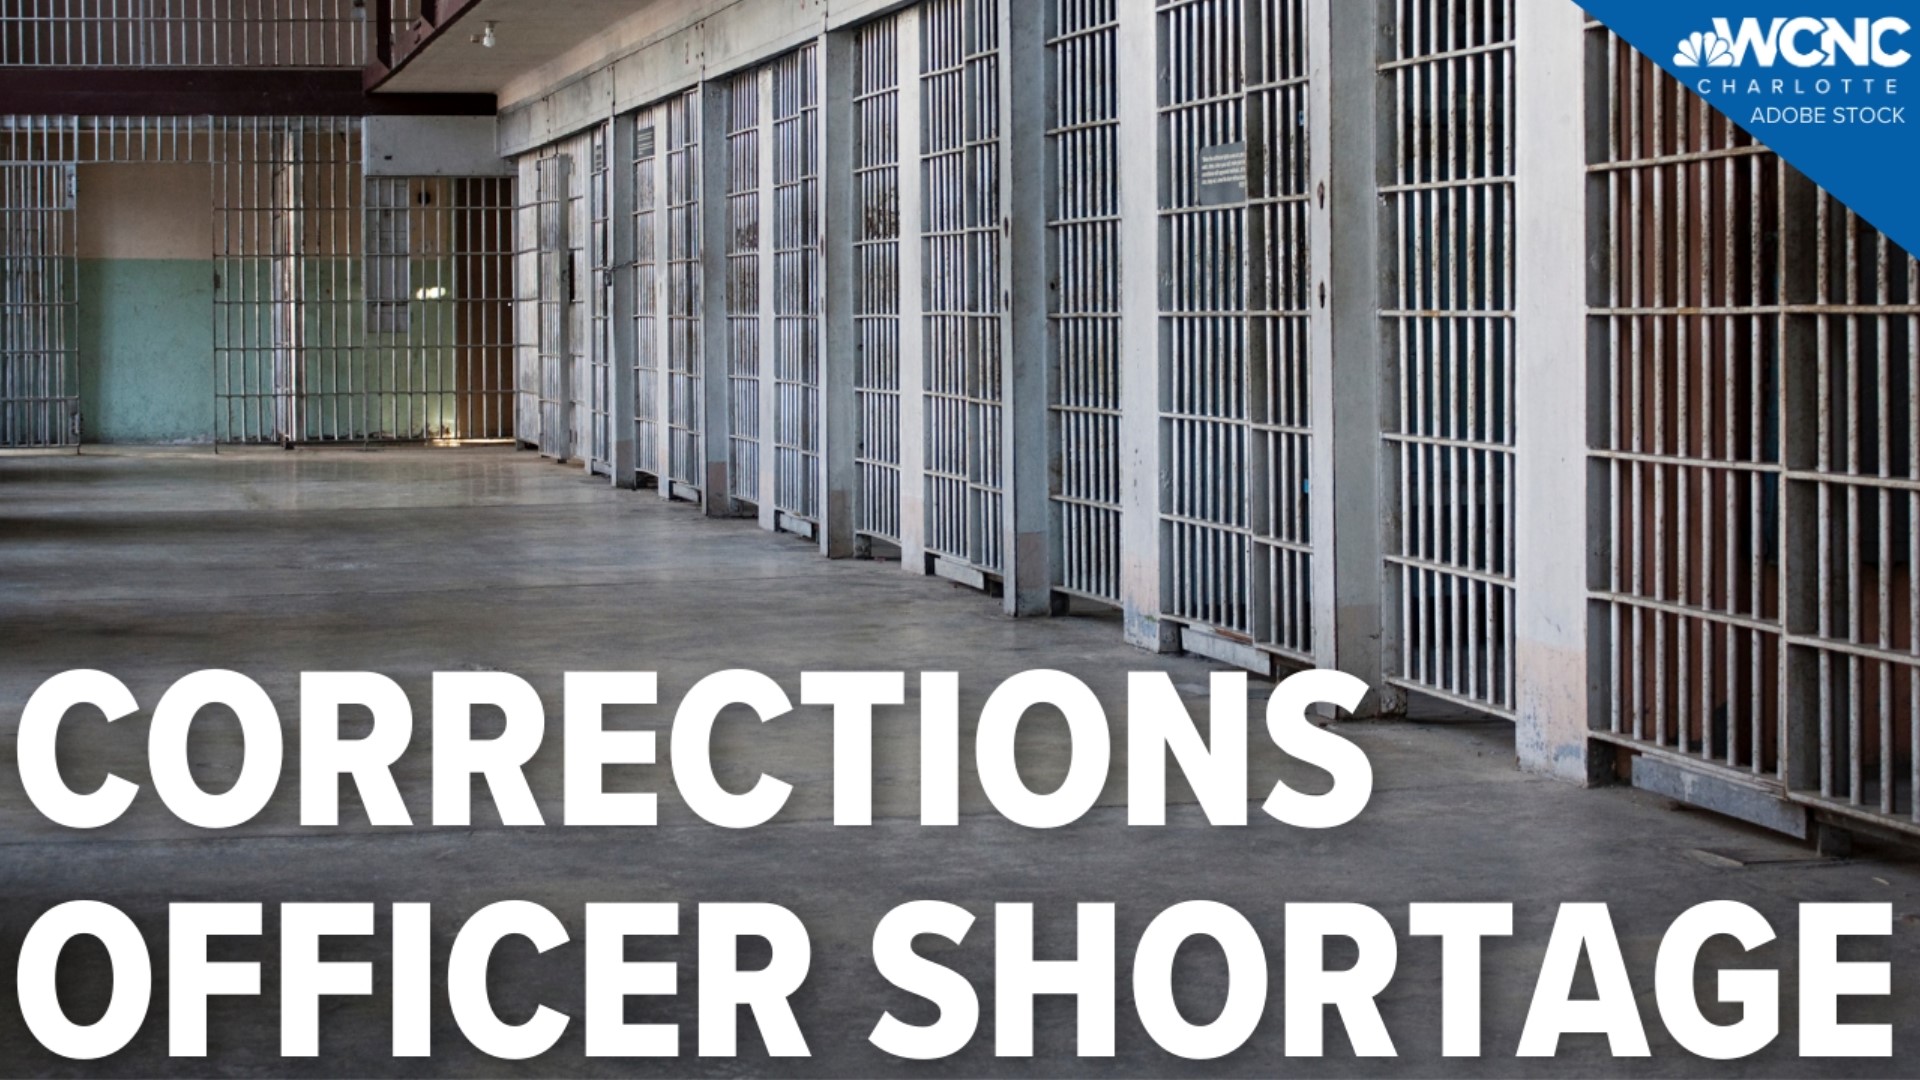 The nationwide corrections officer shortage continues to take its toll.